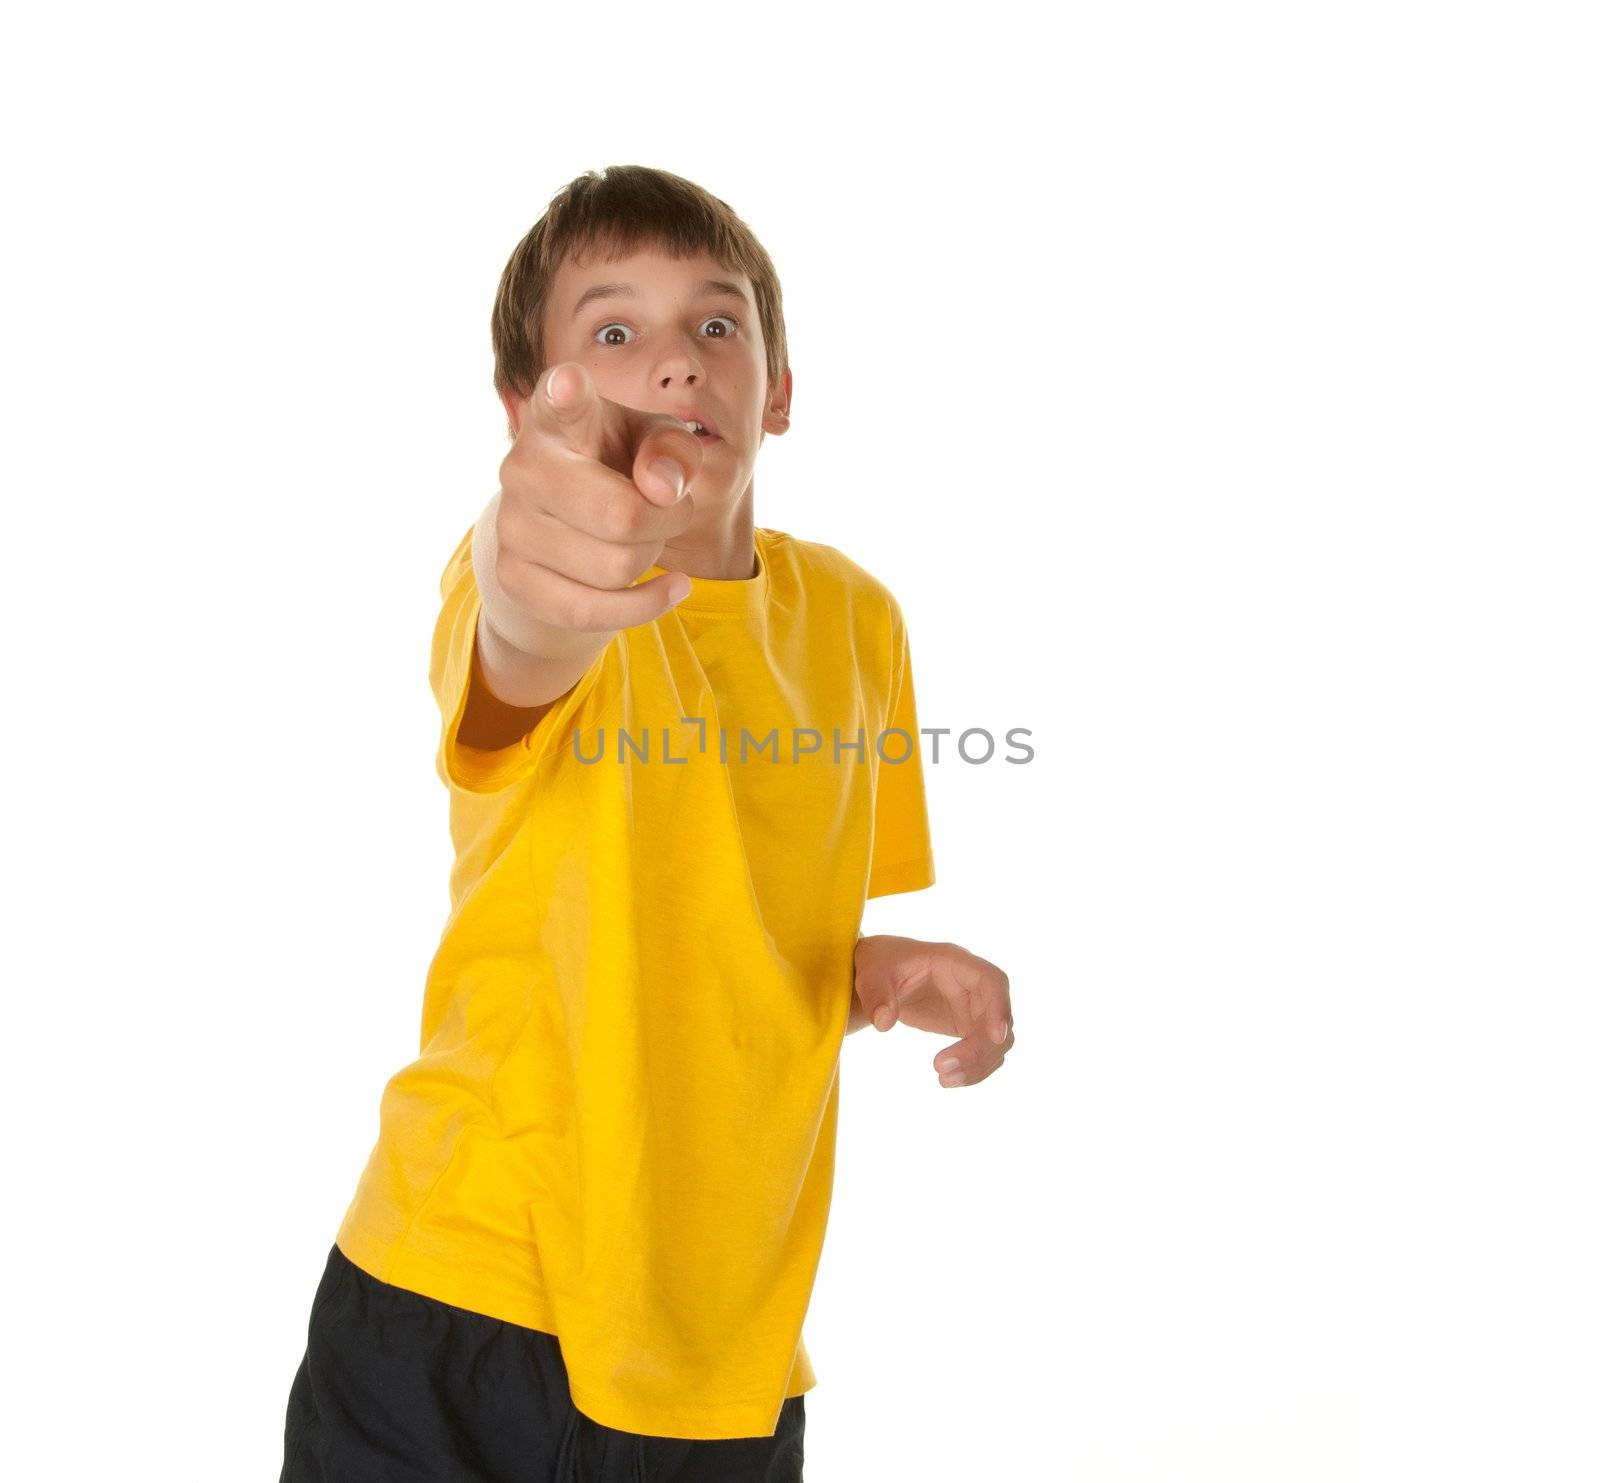 boy pointing towards the camera isolated white